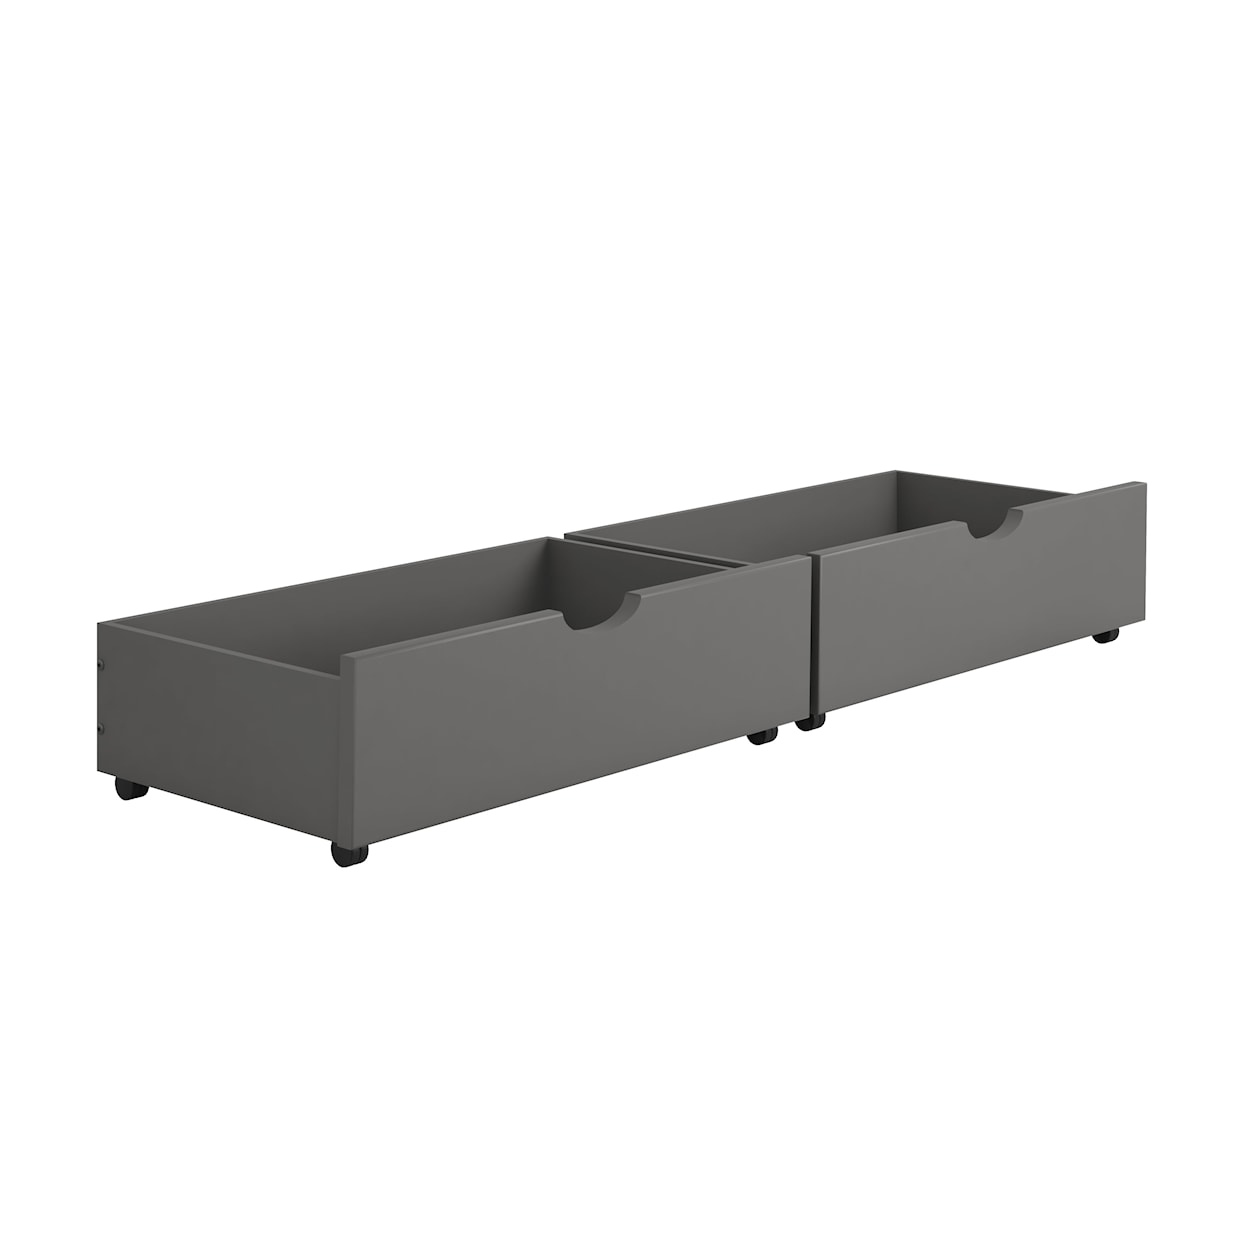 Donco Trading Co Donco Trading Co GREY SET OF 2 UNDERBED DRAWERS |